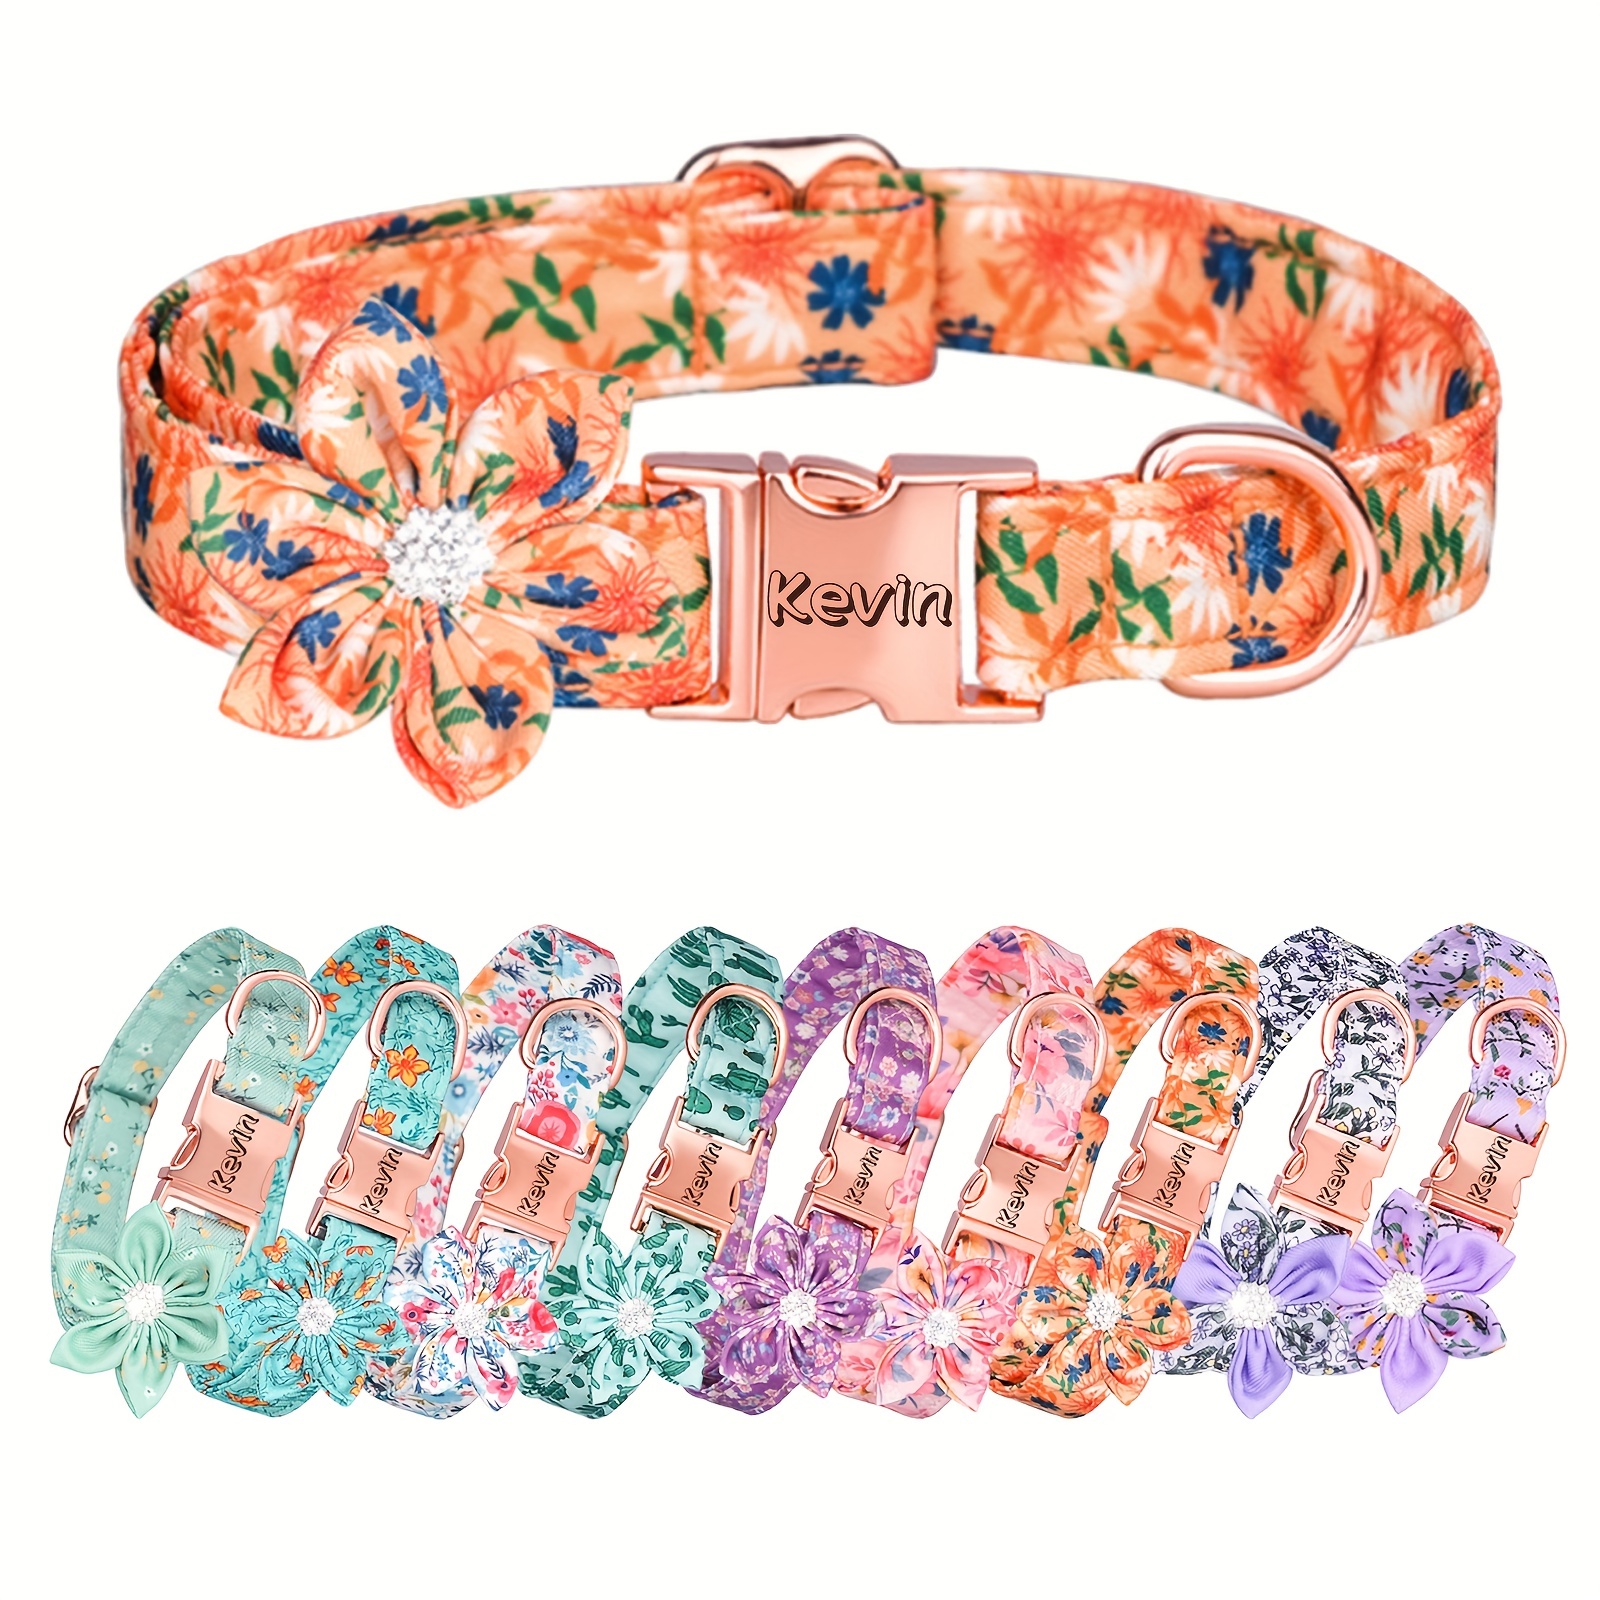 

Custom Rhinestone Flower Dog Collar, Printed Polyester Pet Collar, Adjustable Engraved Anti-lost Pet Collar For Large, Medium And Small Dogs